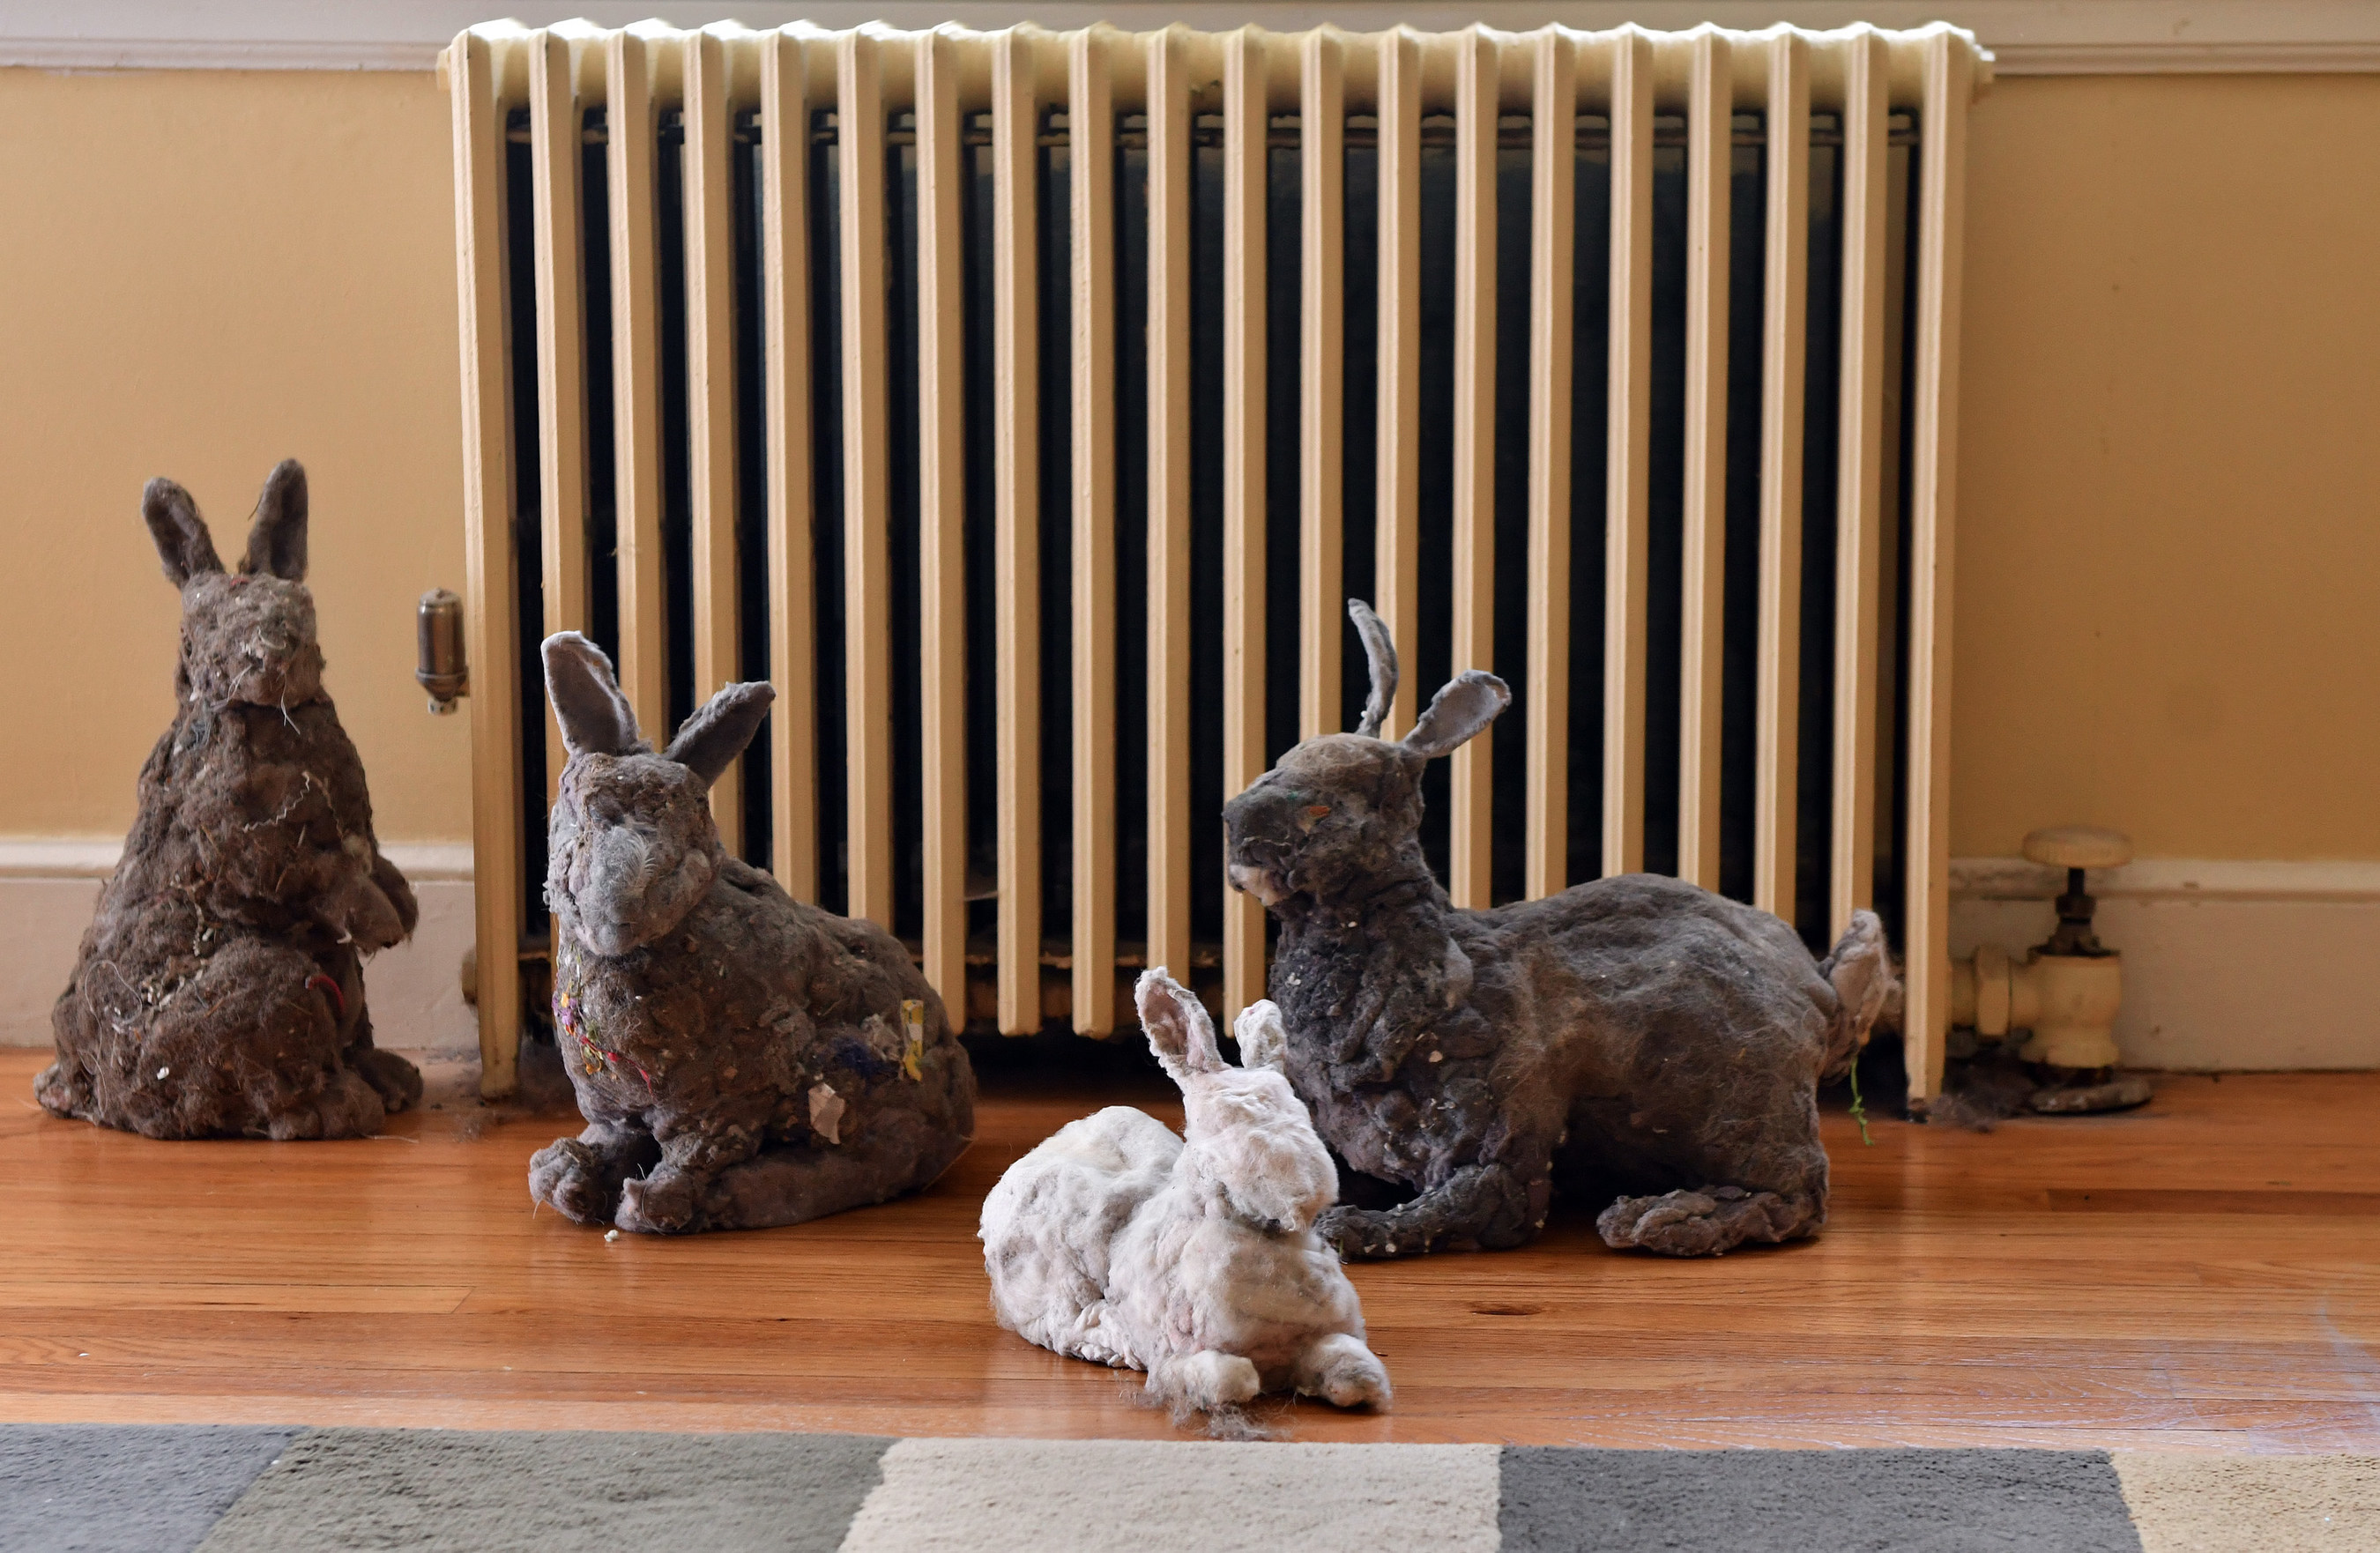 Bunny sculptures by artist Suzanne Proulx, fabricated from household dust, sit together in a living room, Friday, August 26, 2016 in Lexington, Mass. The sculptures, commissioned by Febreze(r) Air Purifiers, were made to represent what 40 pounds of dust, the average amount a U.S. home will collect in a year, could look like. (Josh Reynolds/AP Images for Febreze(r) Air Purifiers)